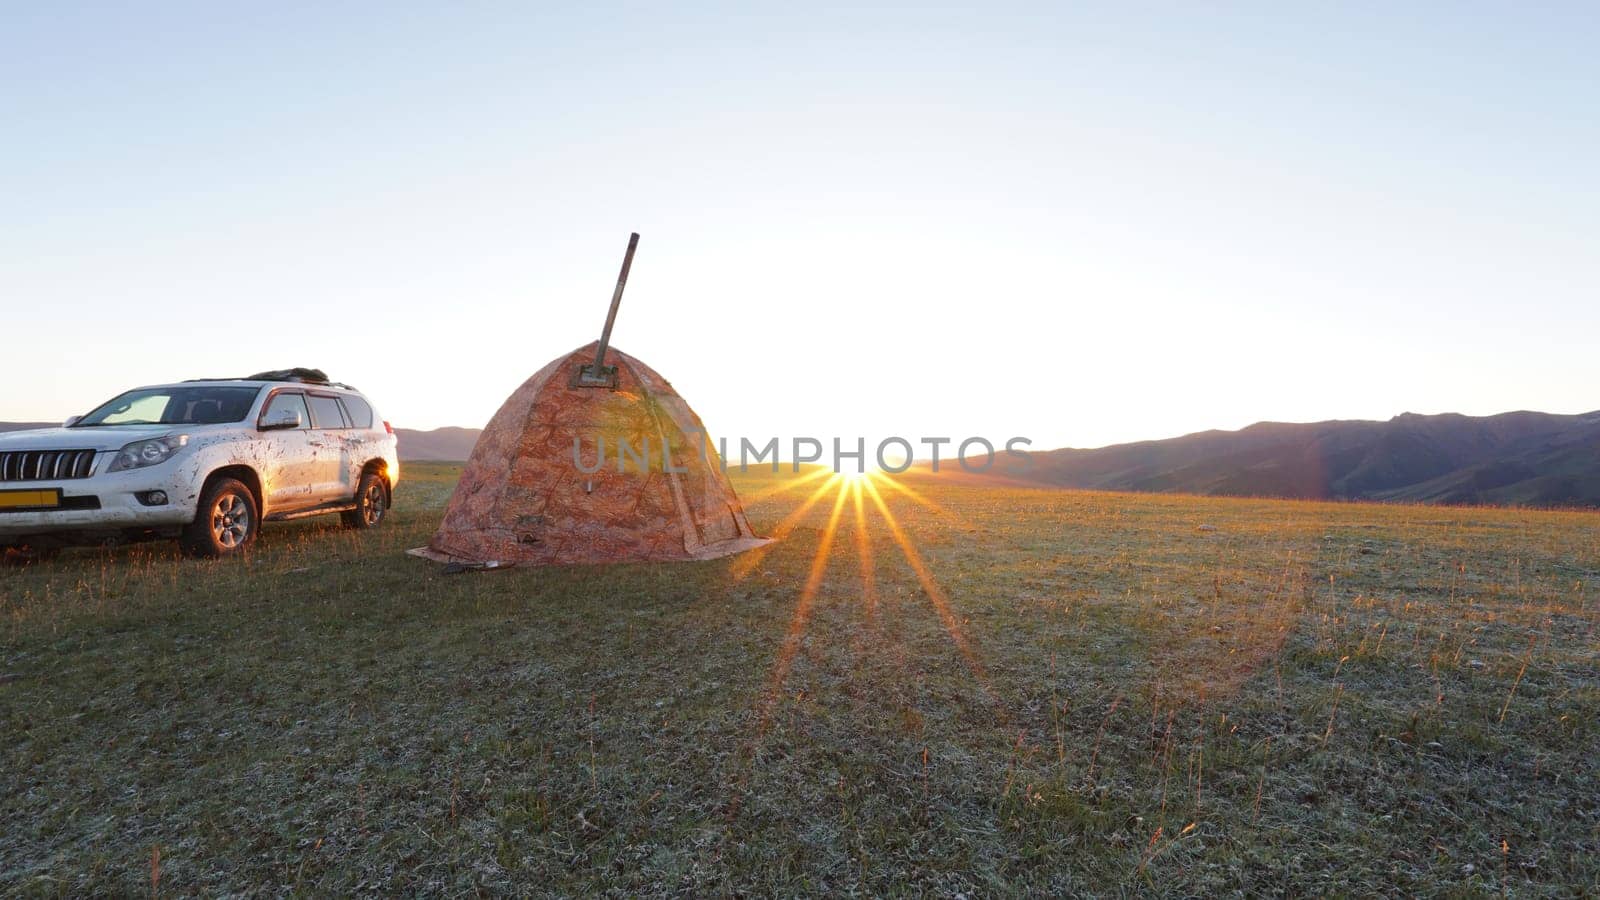 Sunrise among green fields and hills. Camping by Passcal